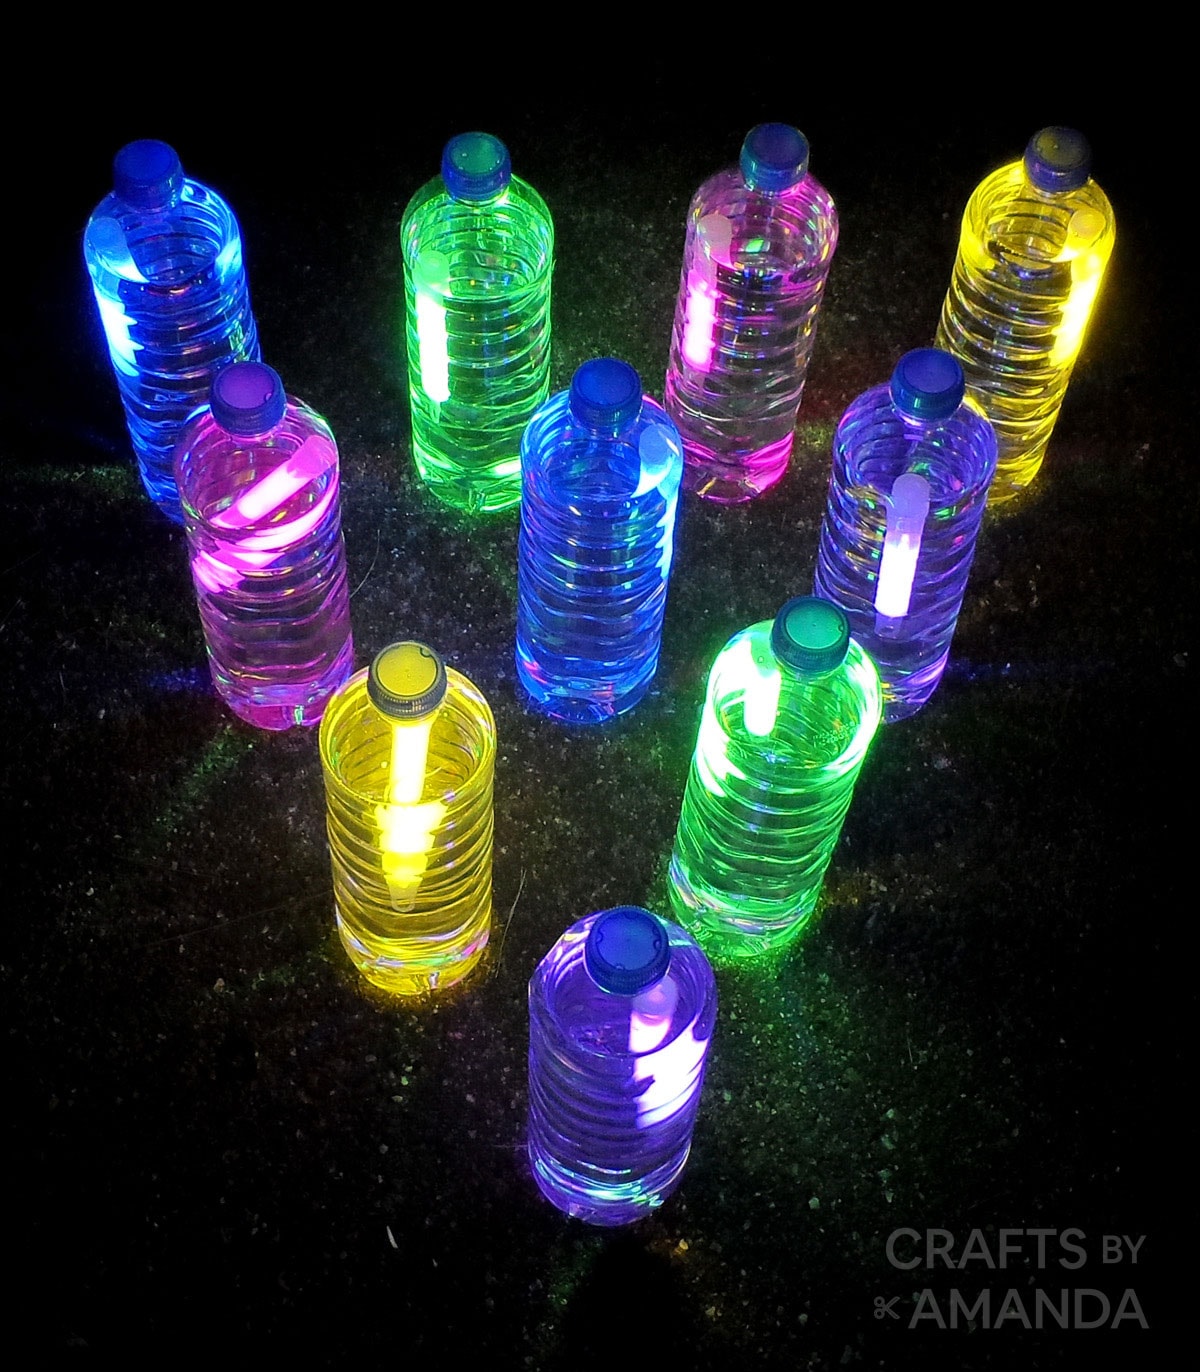 Break glow sticks into water bottles for some nighttime lawn bowling action.